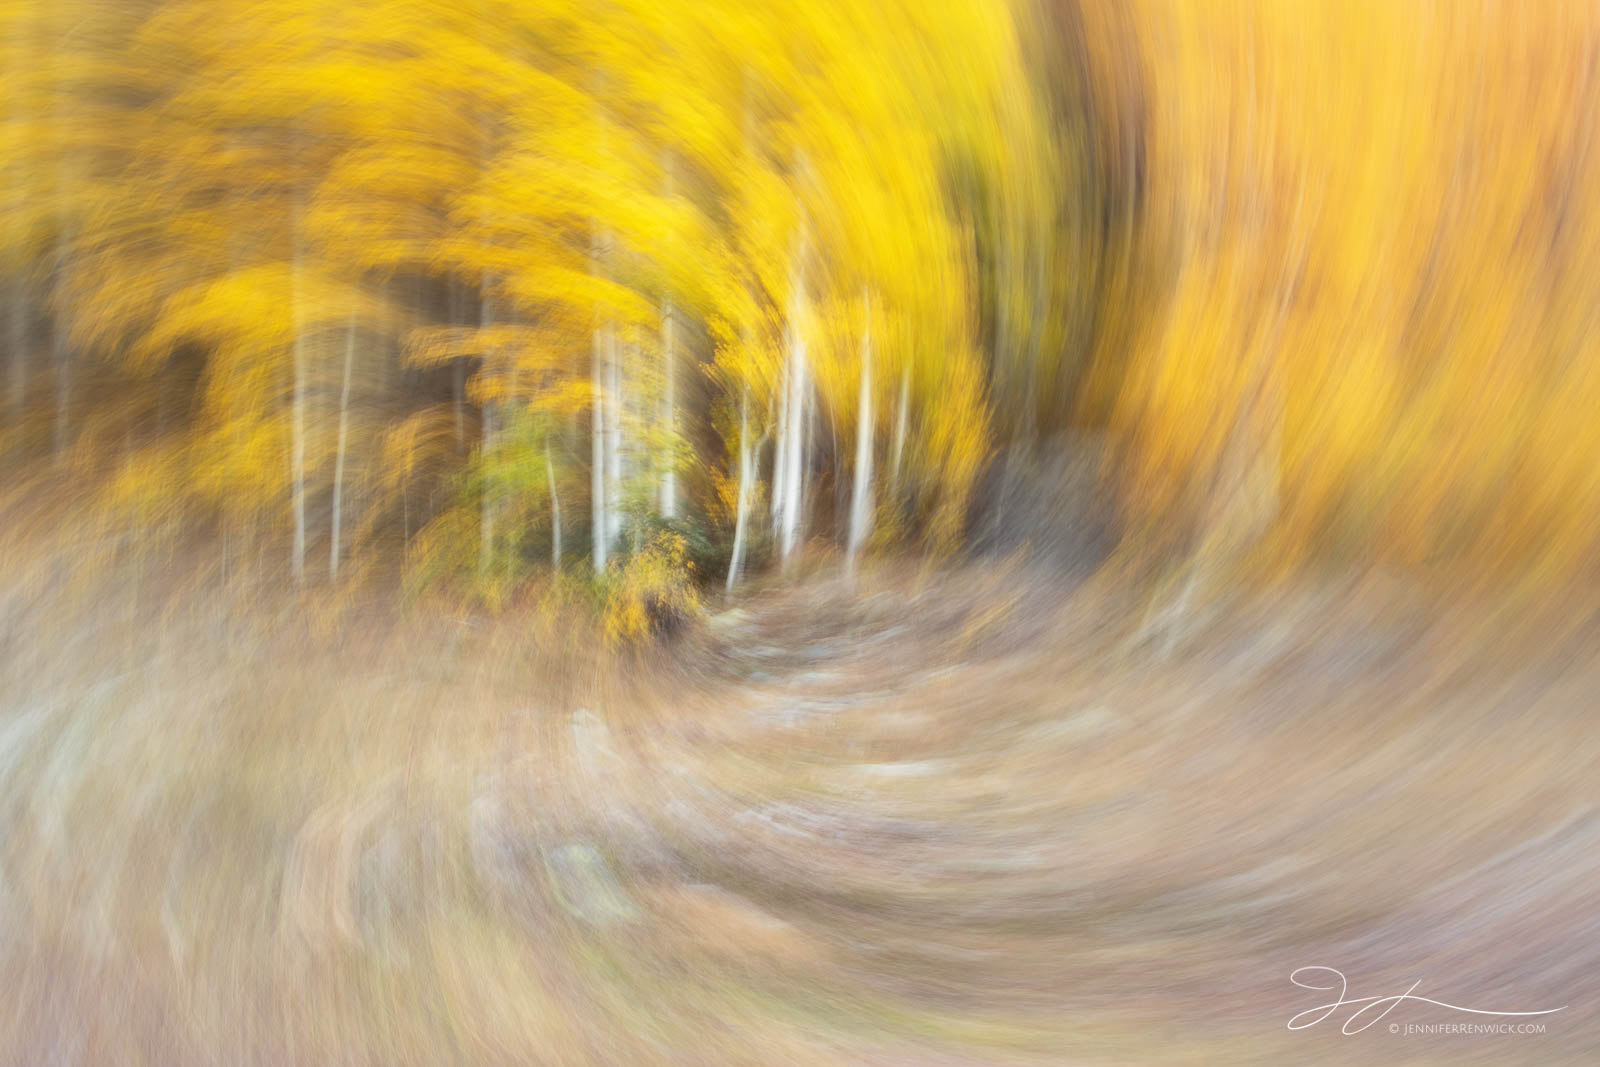 Aspen trees seem to spin in this image created using intentional camera movement.